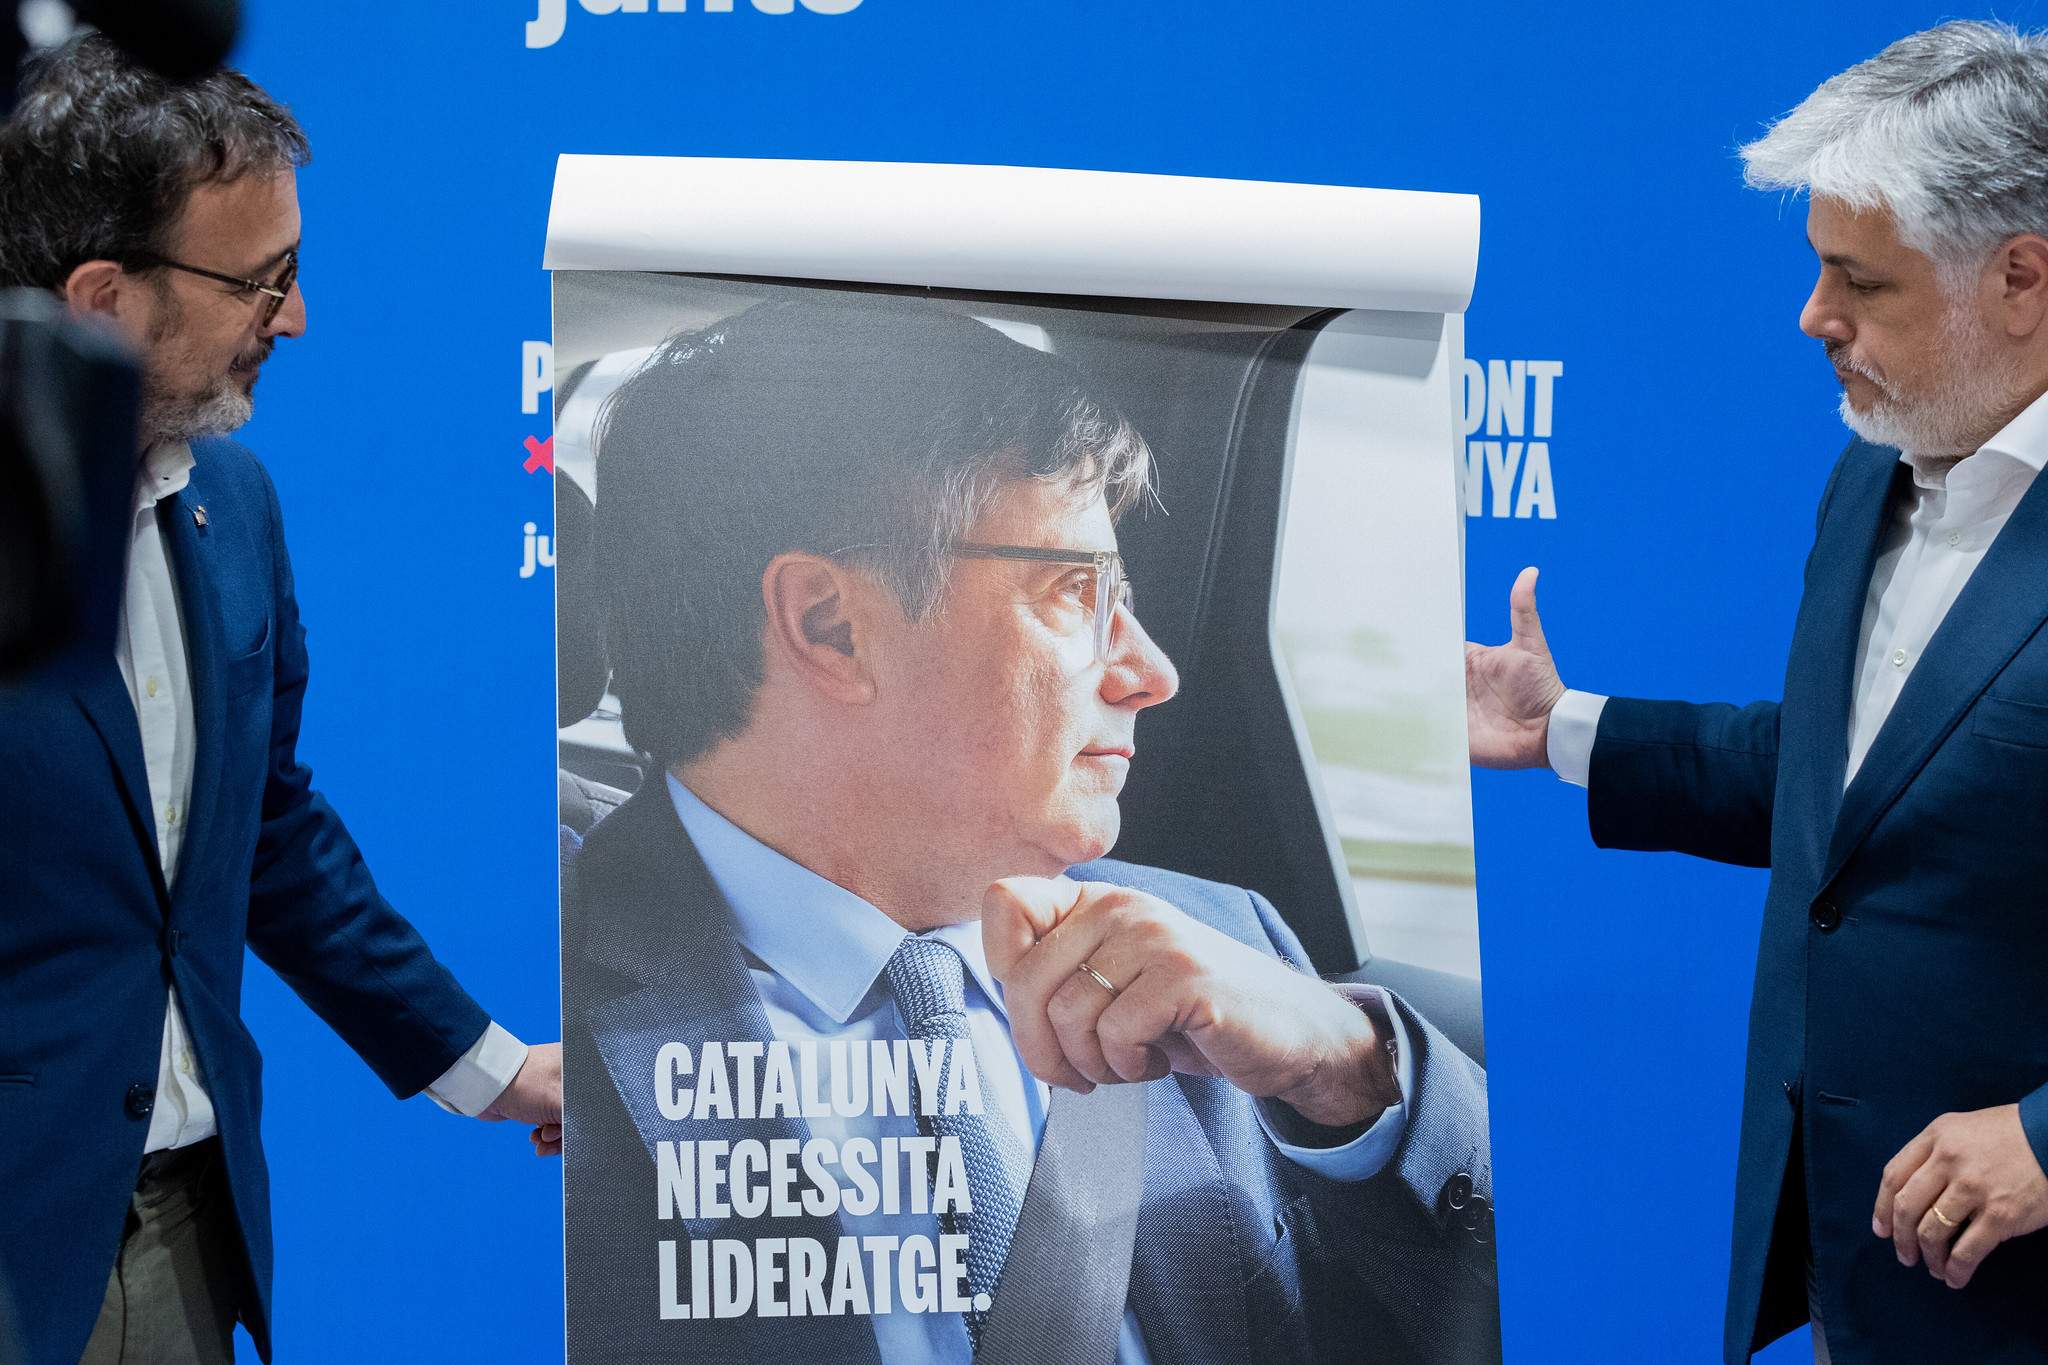 Puigdemont's campaign slogan for May 12th: "Catalonia needs leadership"